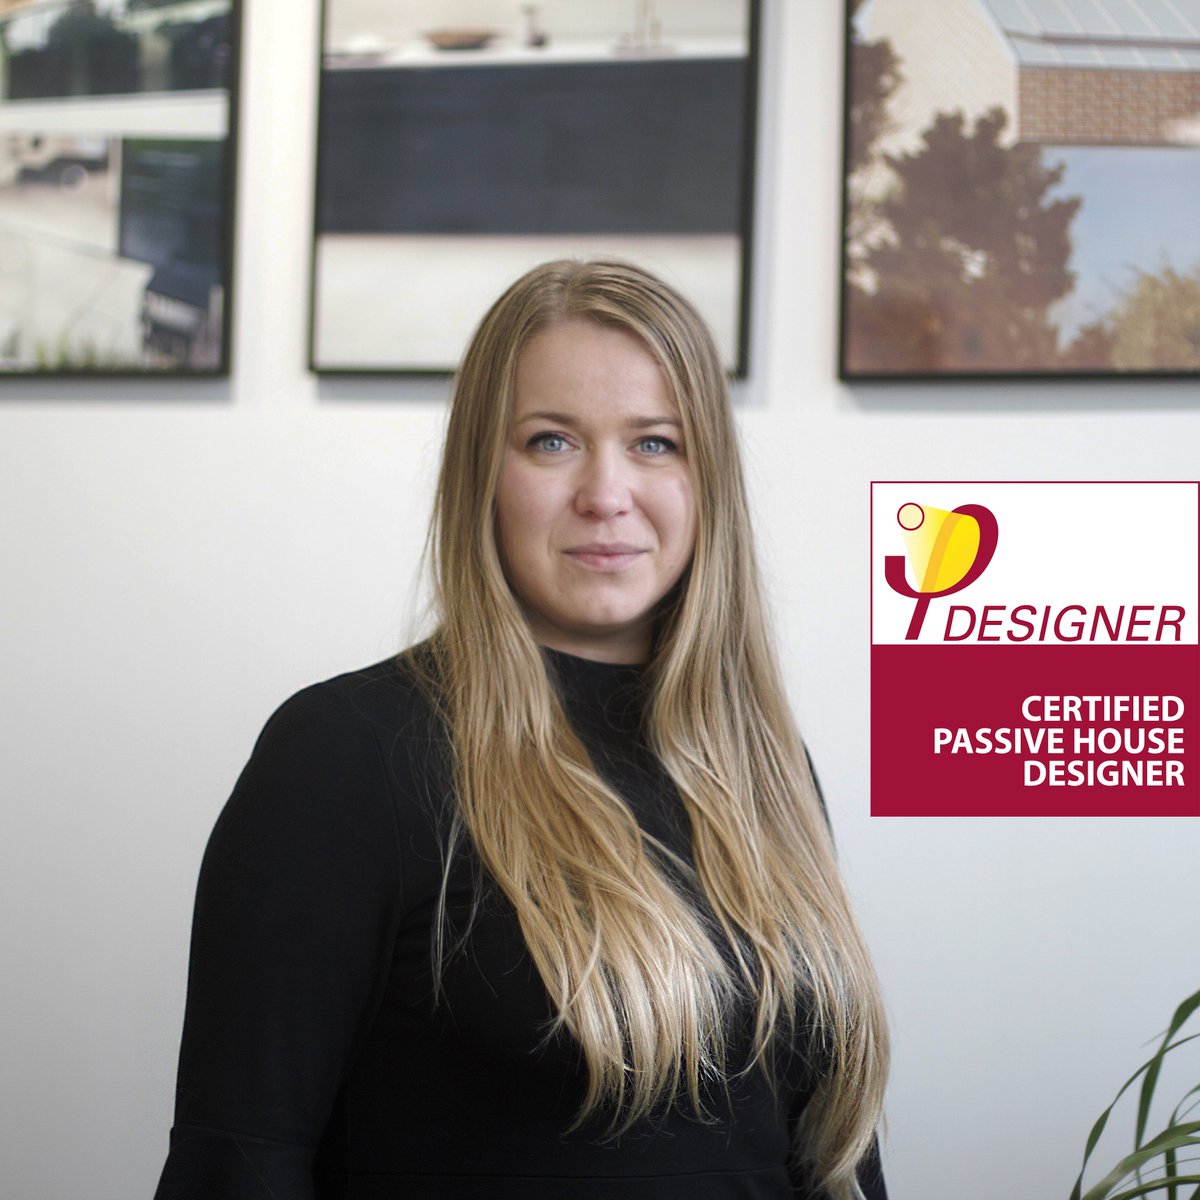 Wonderful news in the office today! Our very own Anna Scibior has been working incredibly hard to achieve her #PassiveHouseInstitute certification alongside her (hefty) workload, this is so well-deserved. 

Cheers to you Anna!!🥂

#PassivHaus #SustainableArchitecture